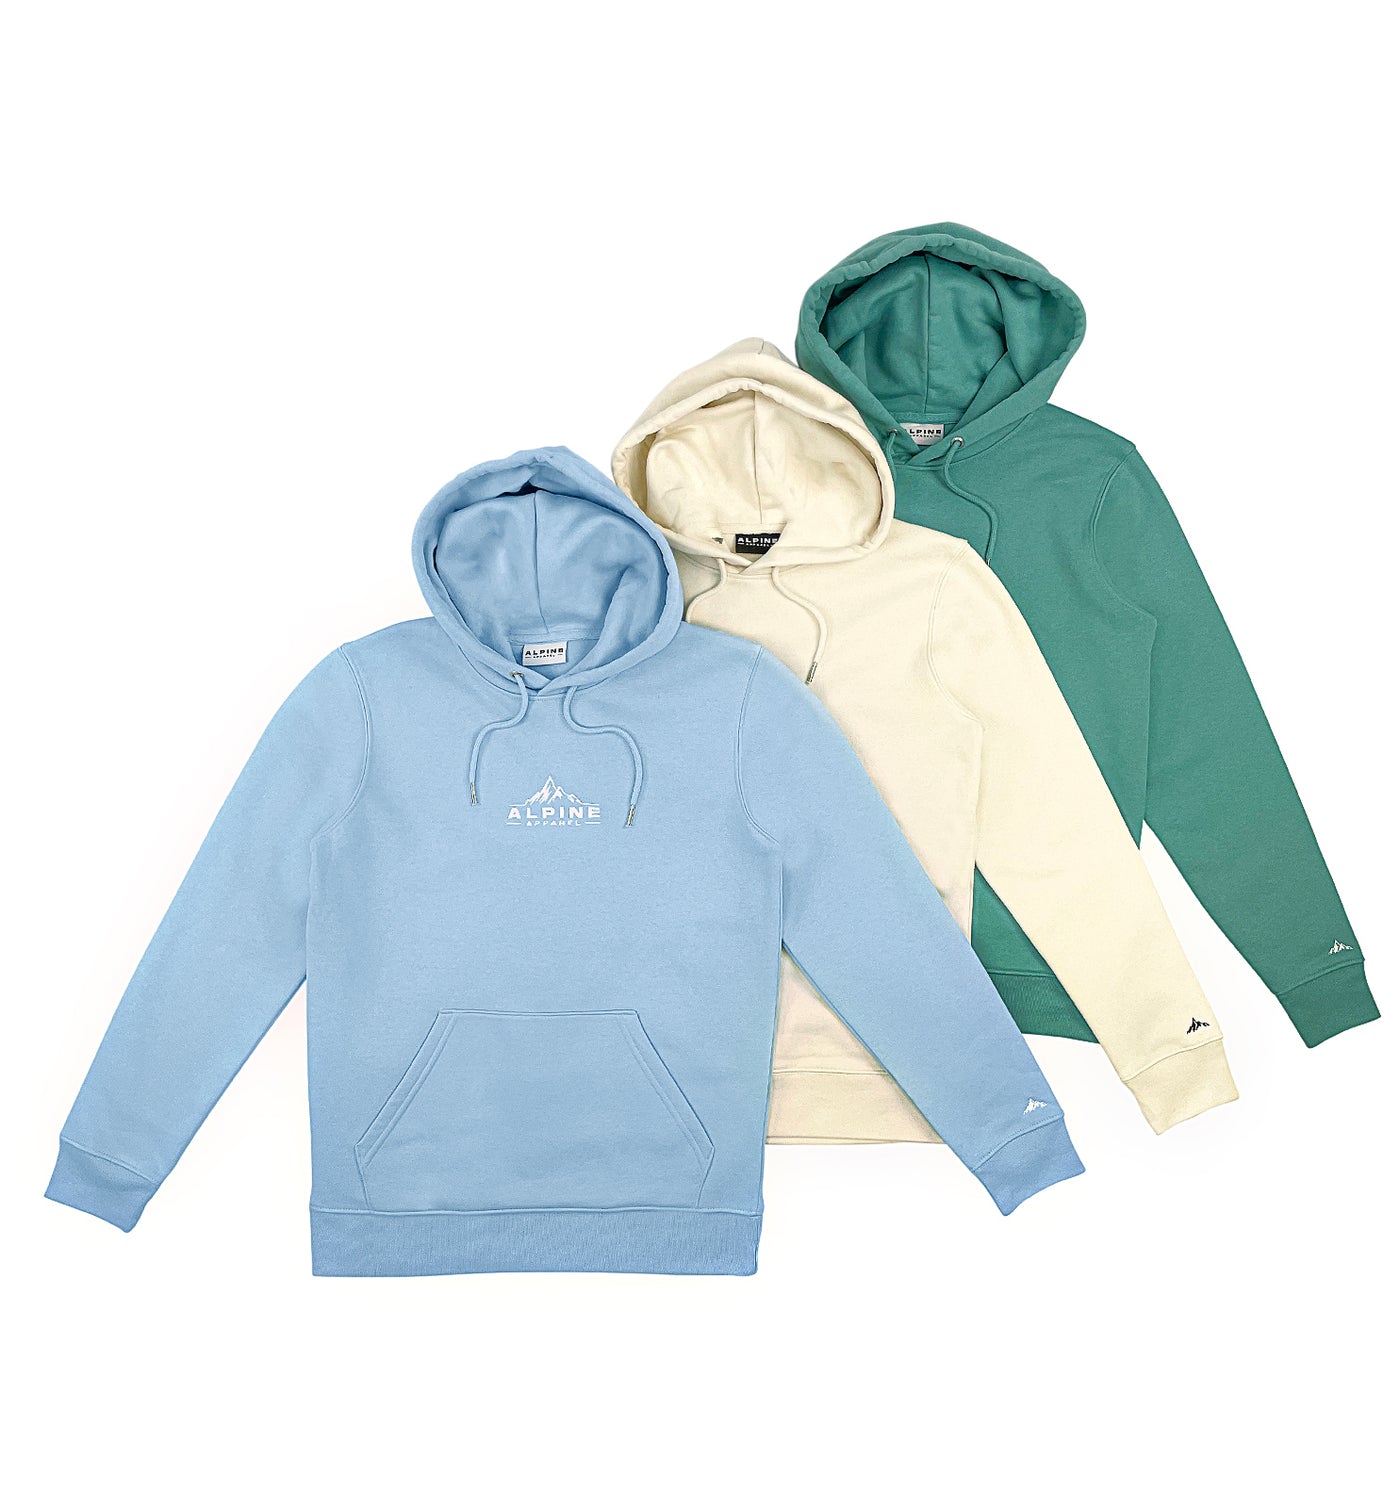 Alpine summer hoodie collection group photo of all 3 colour options